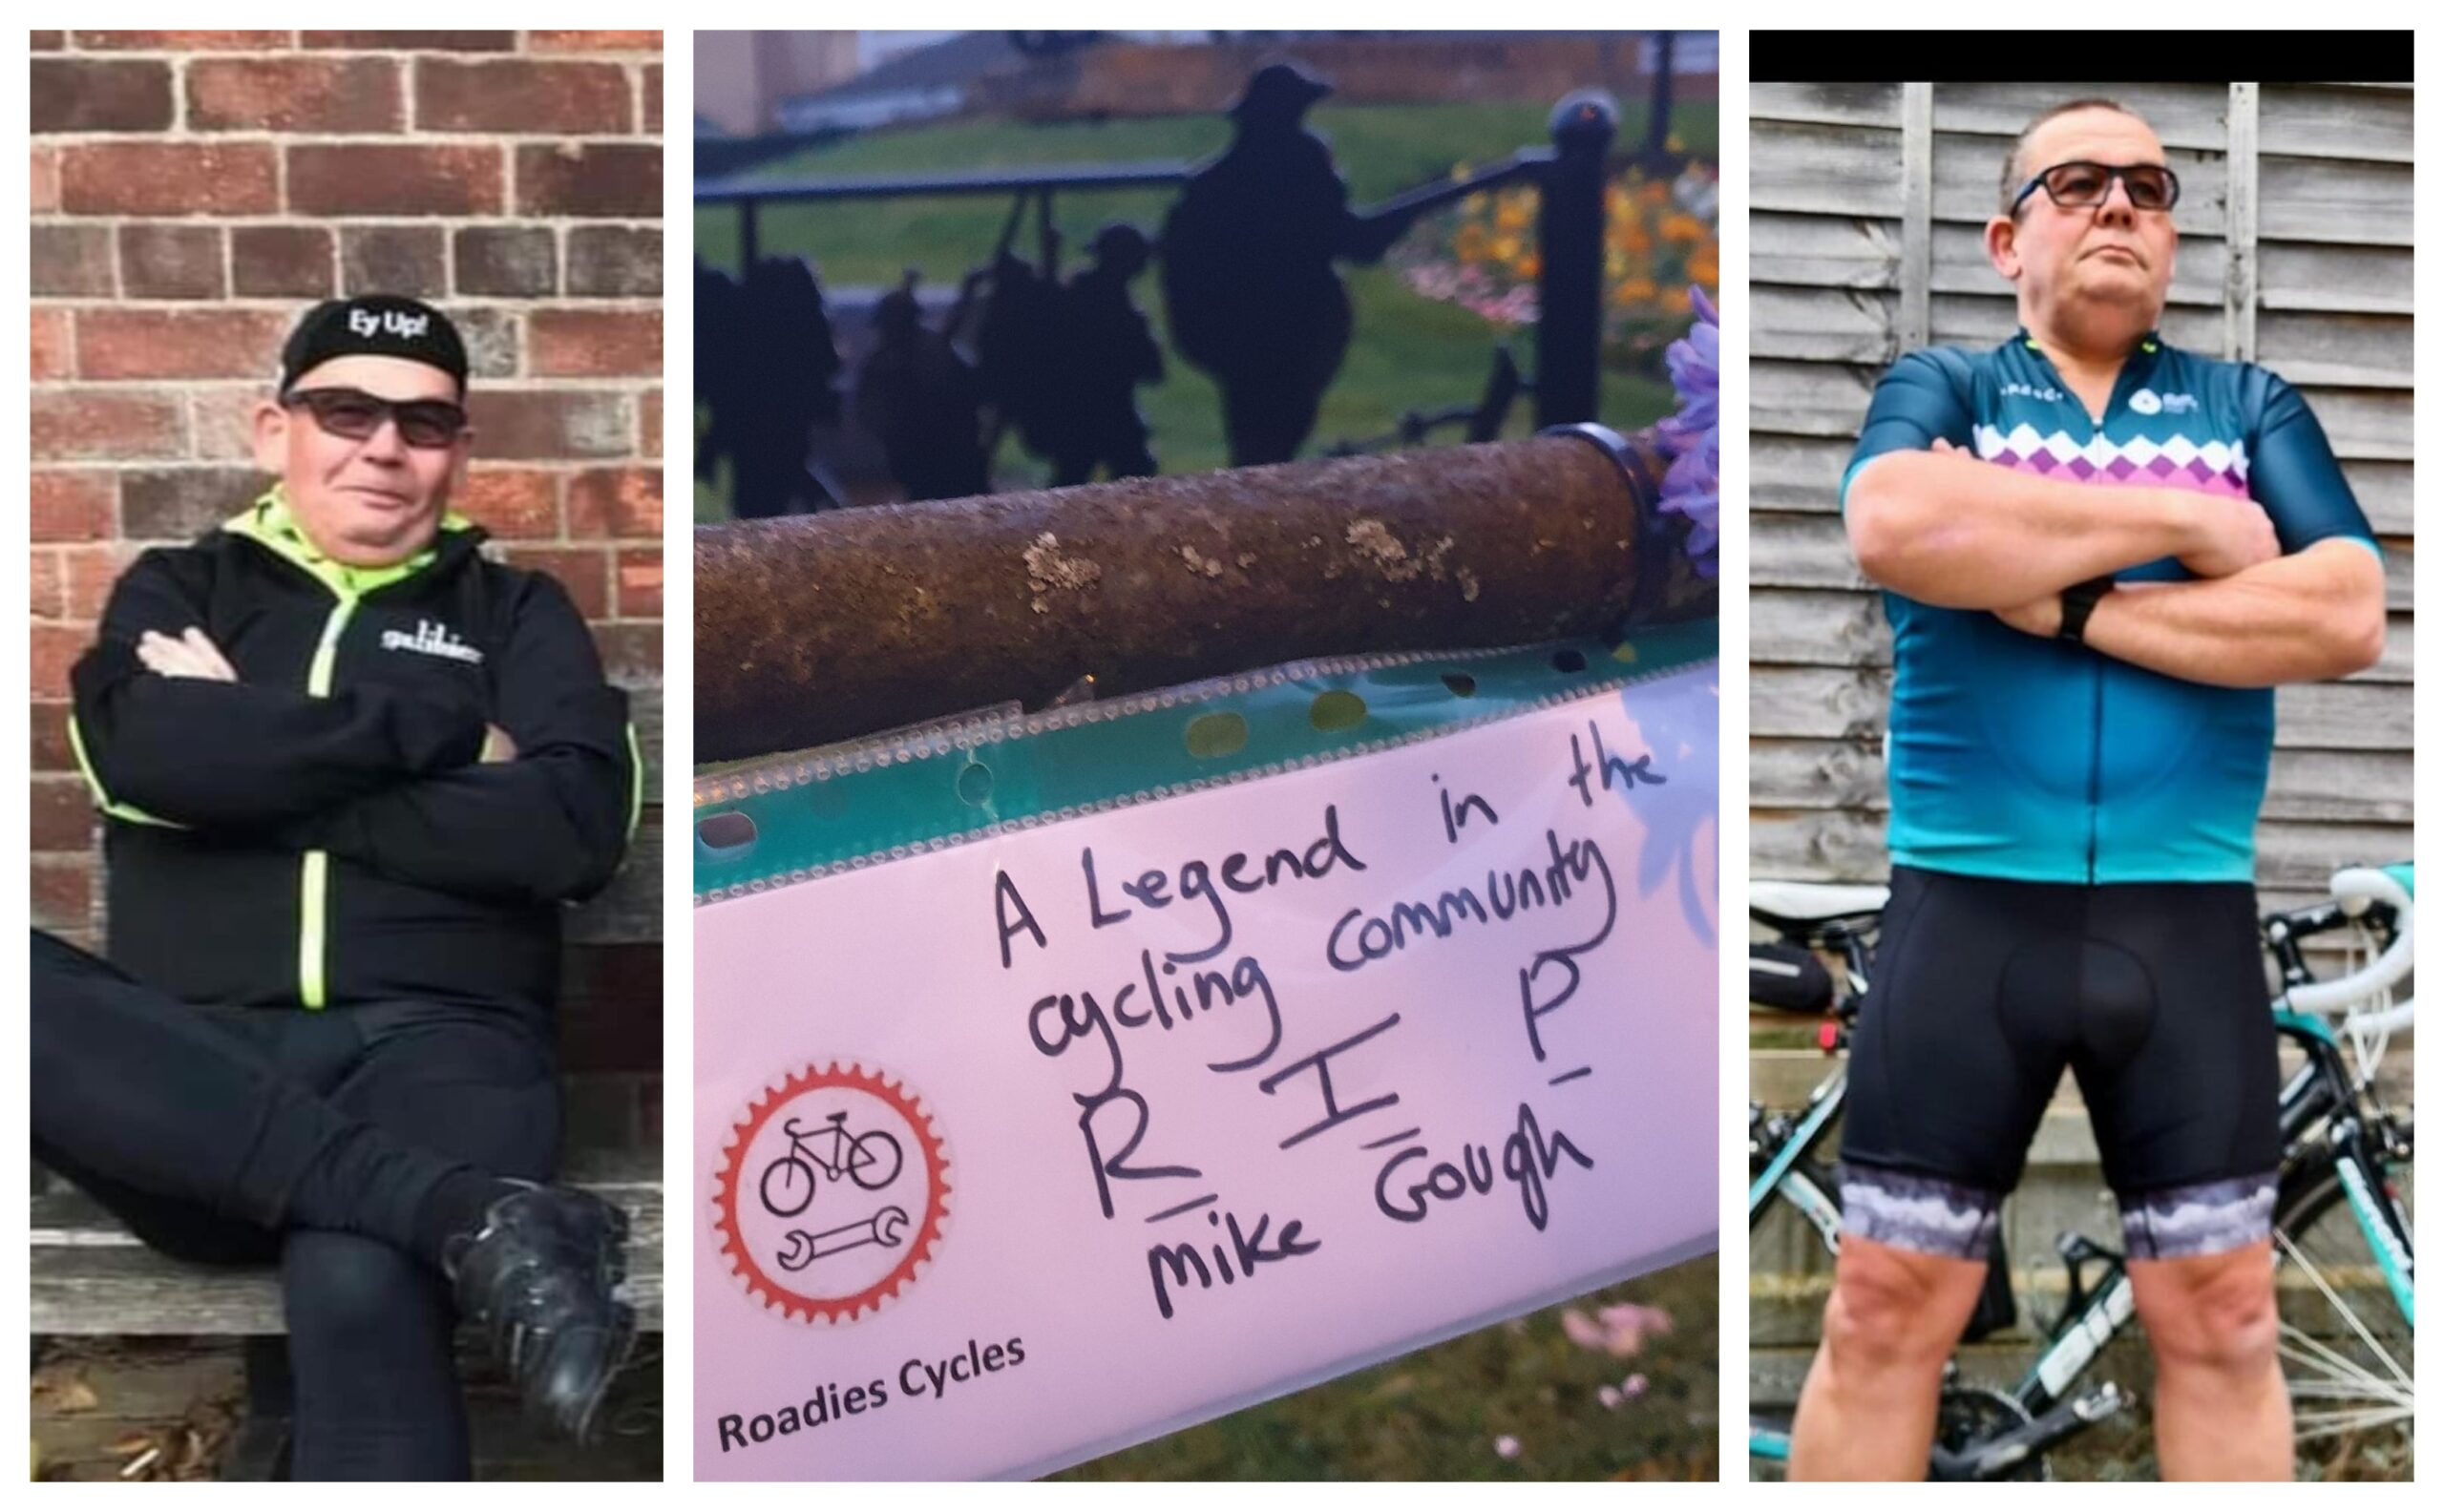 Mike Gough was the owner of Roadies Cycles in Hartford, Huntingdonshire, and much-loved by the community